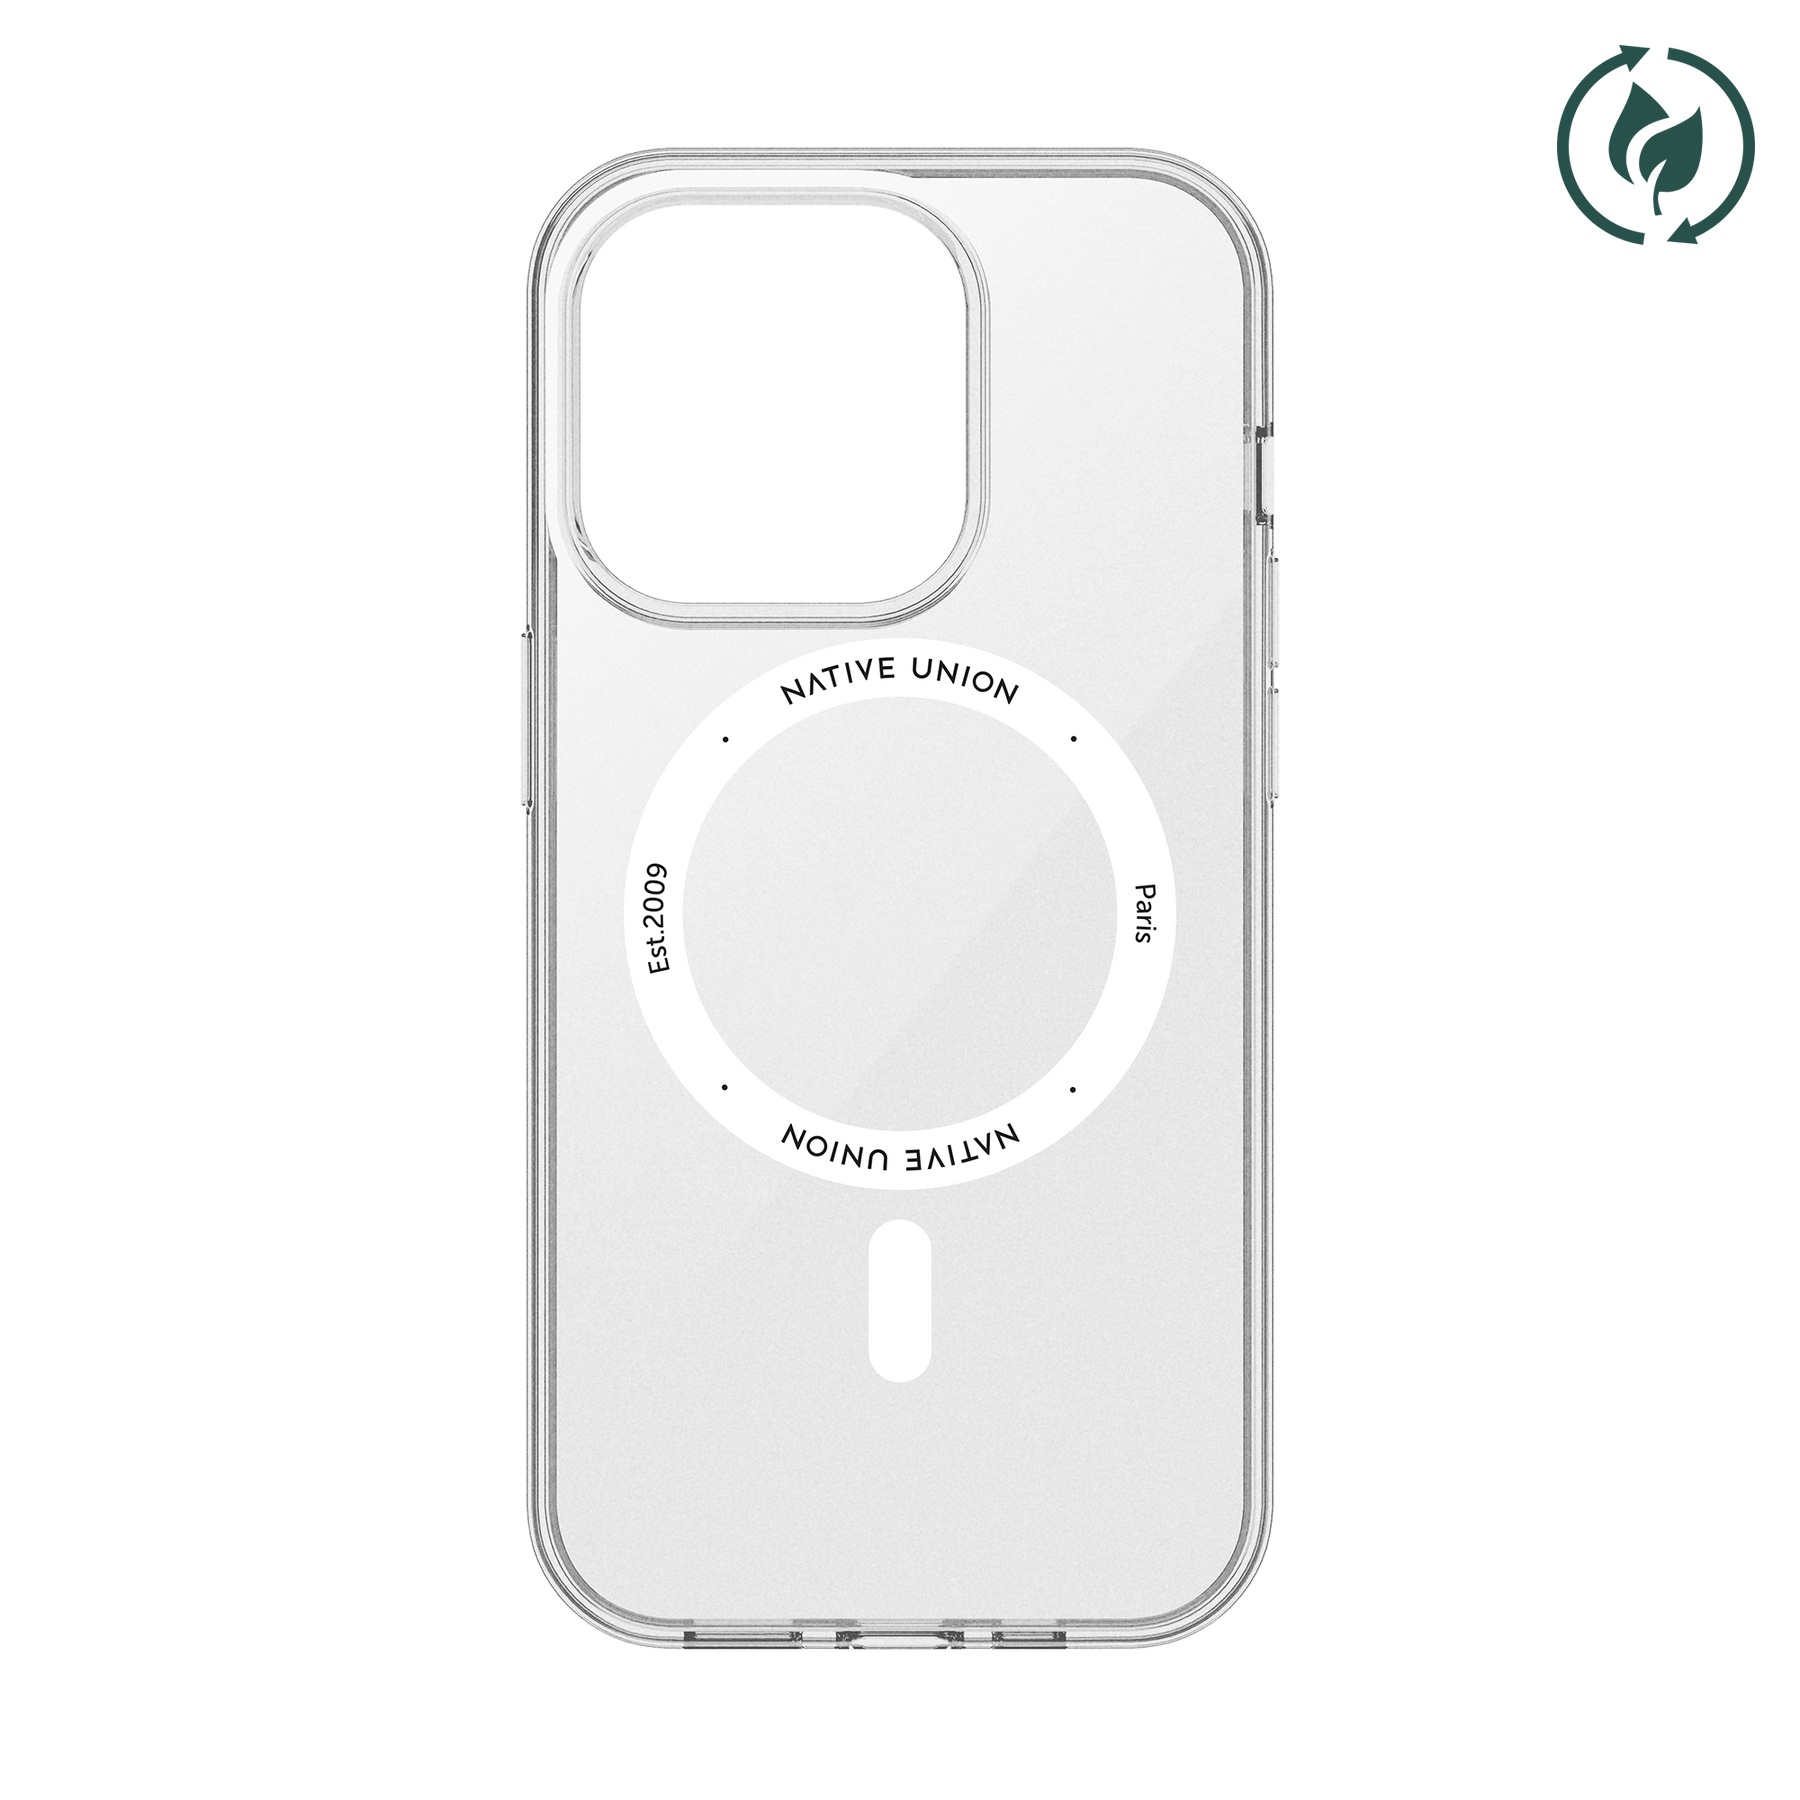 Apple Silicone vs Leather vs Clear Case for iPhone 14 / 14 Pro